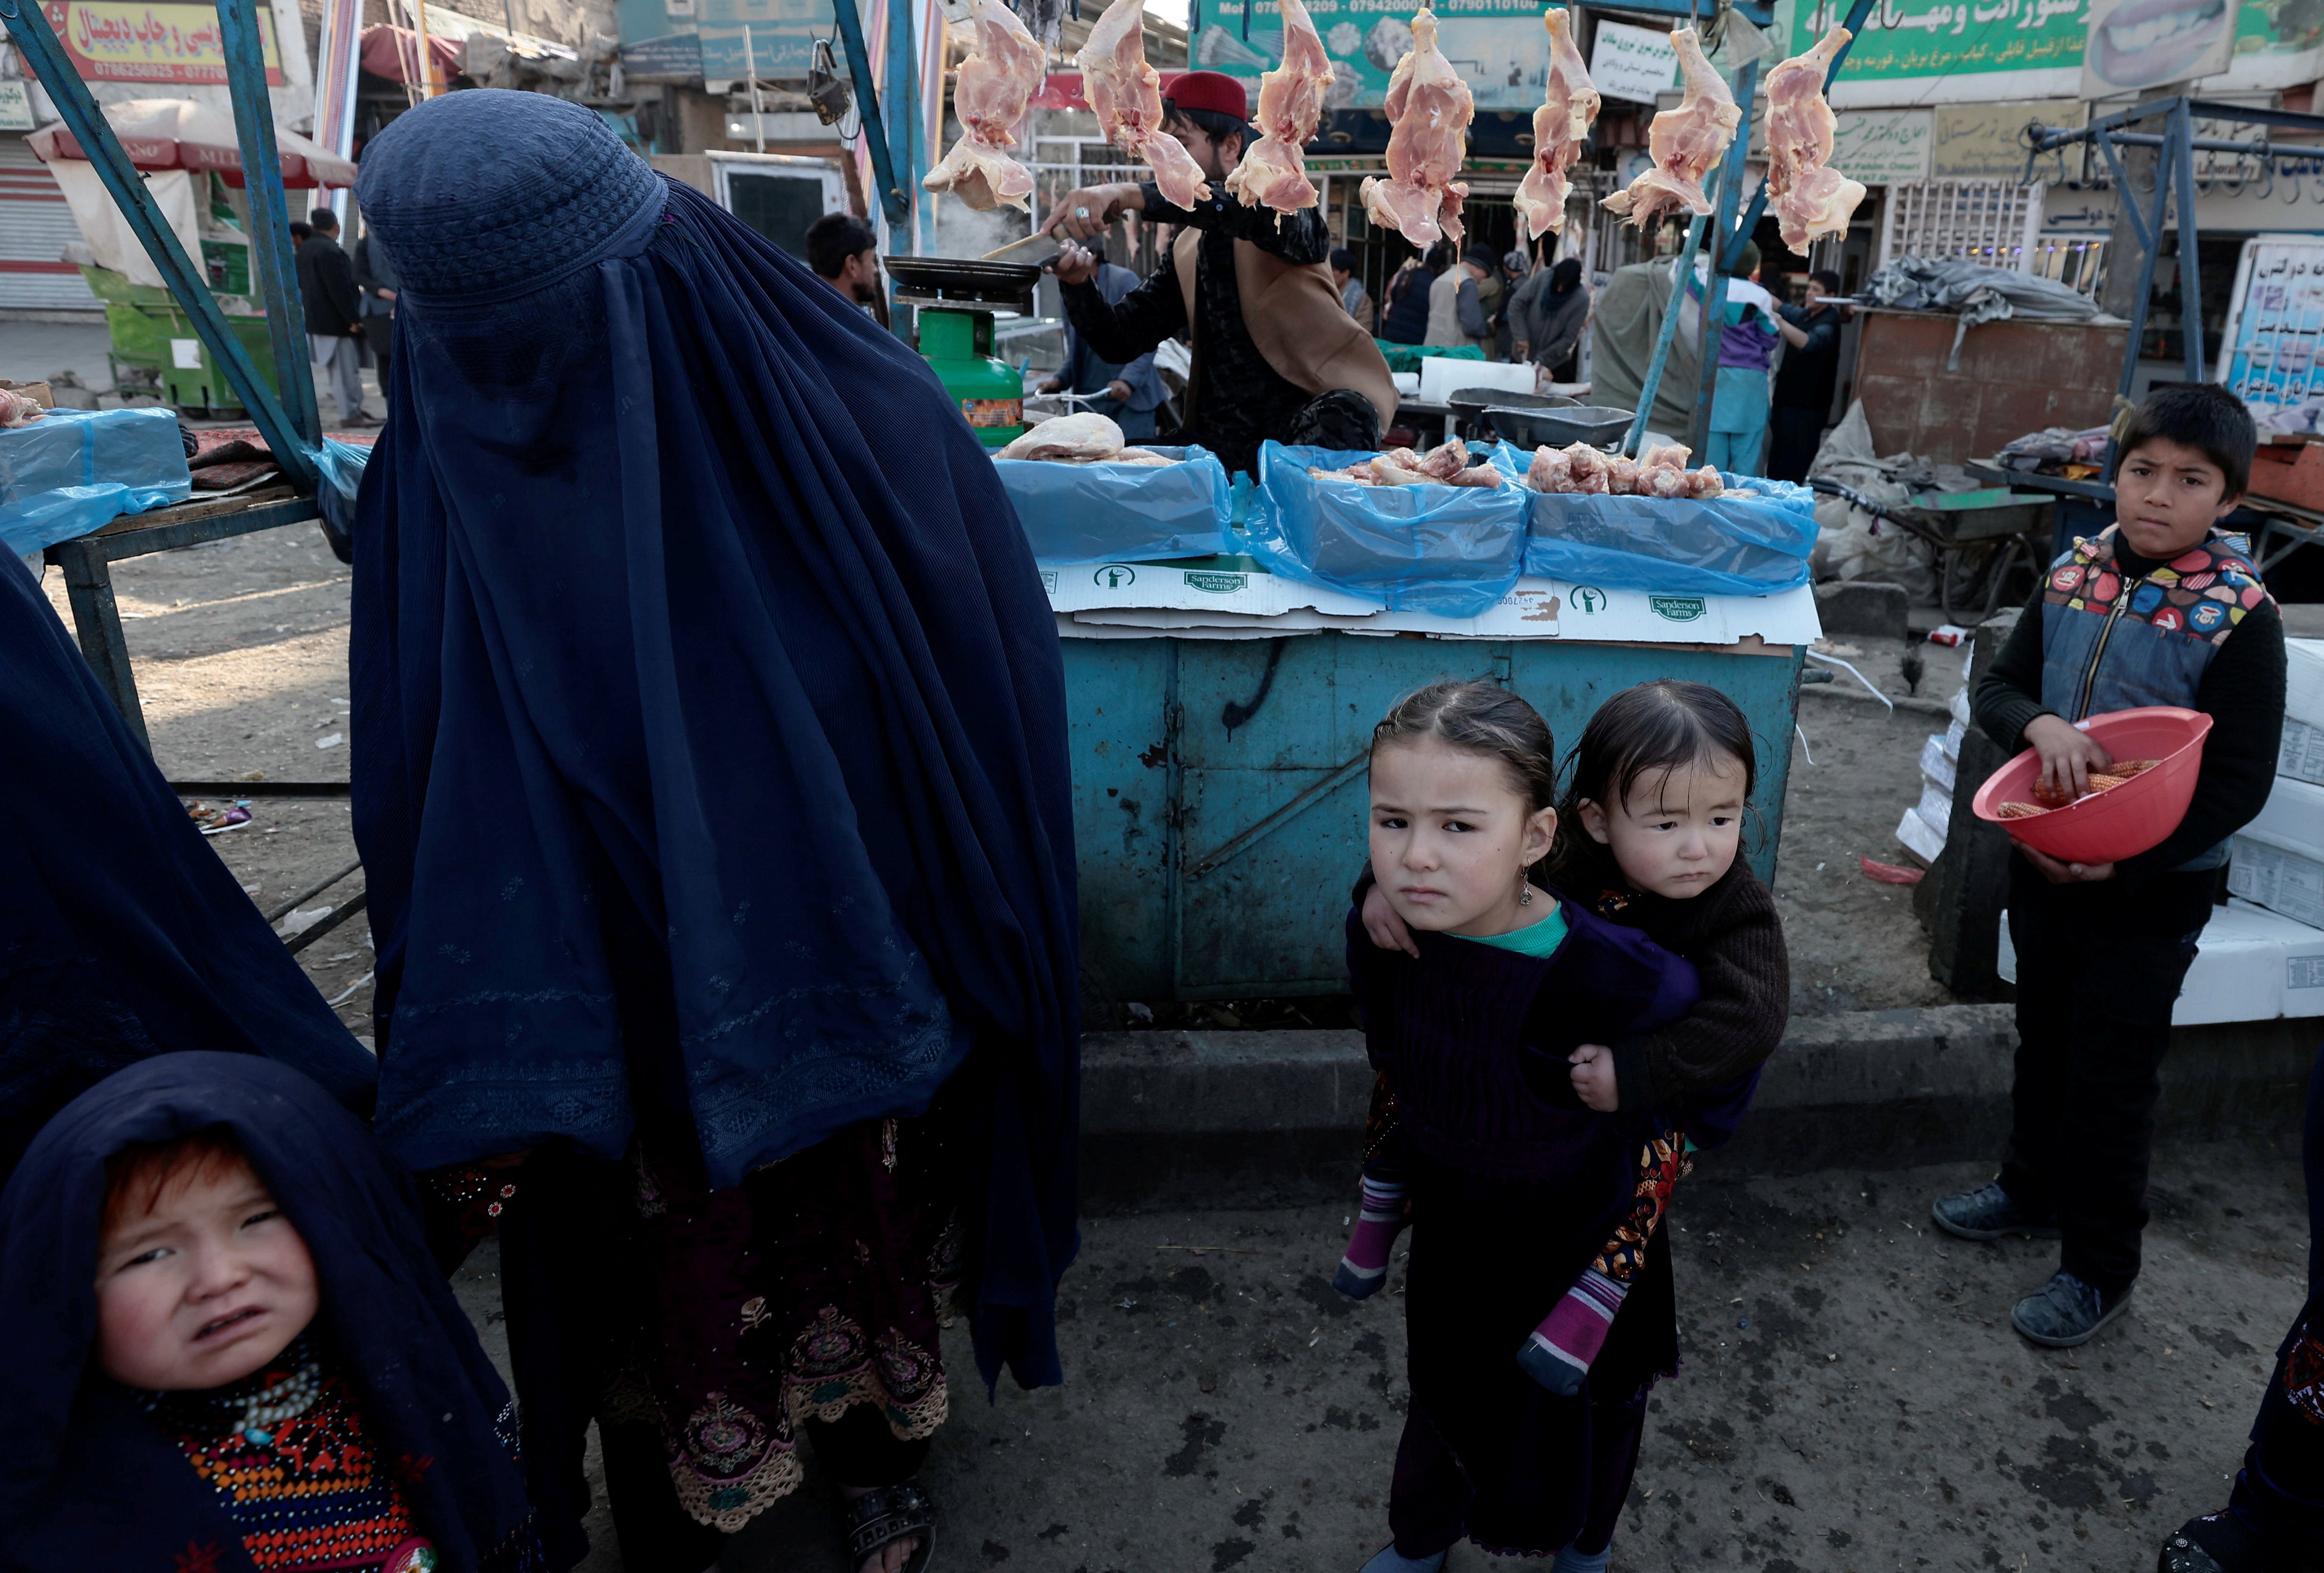 A mother shops with her children at a market in Kabul